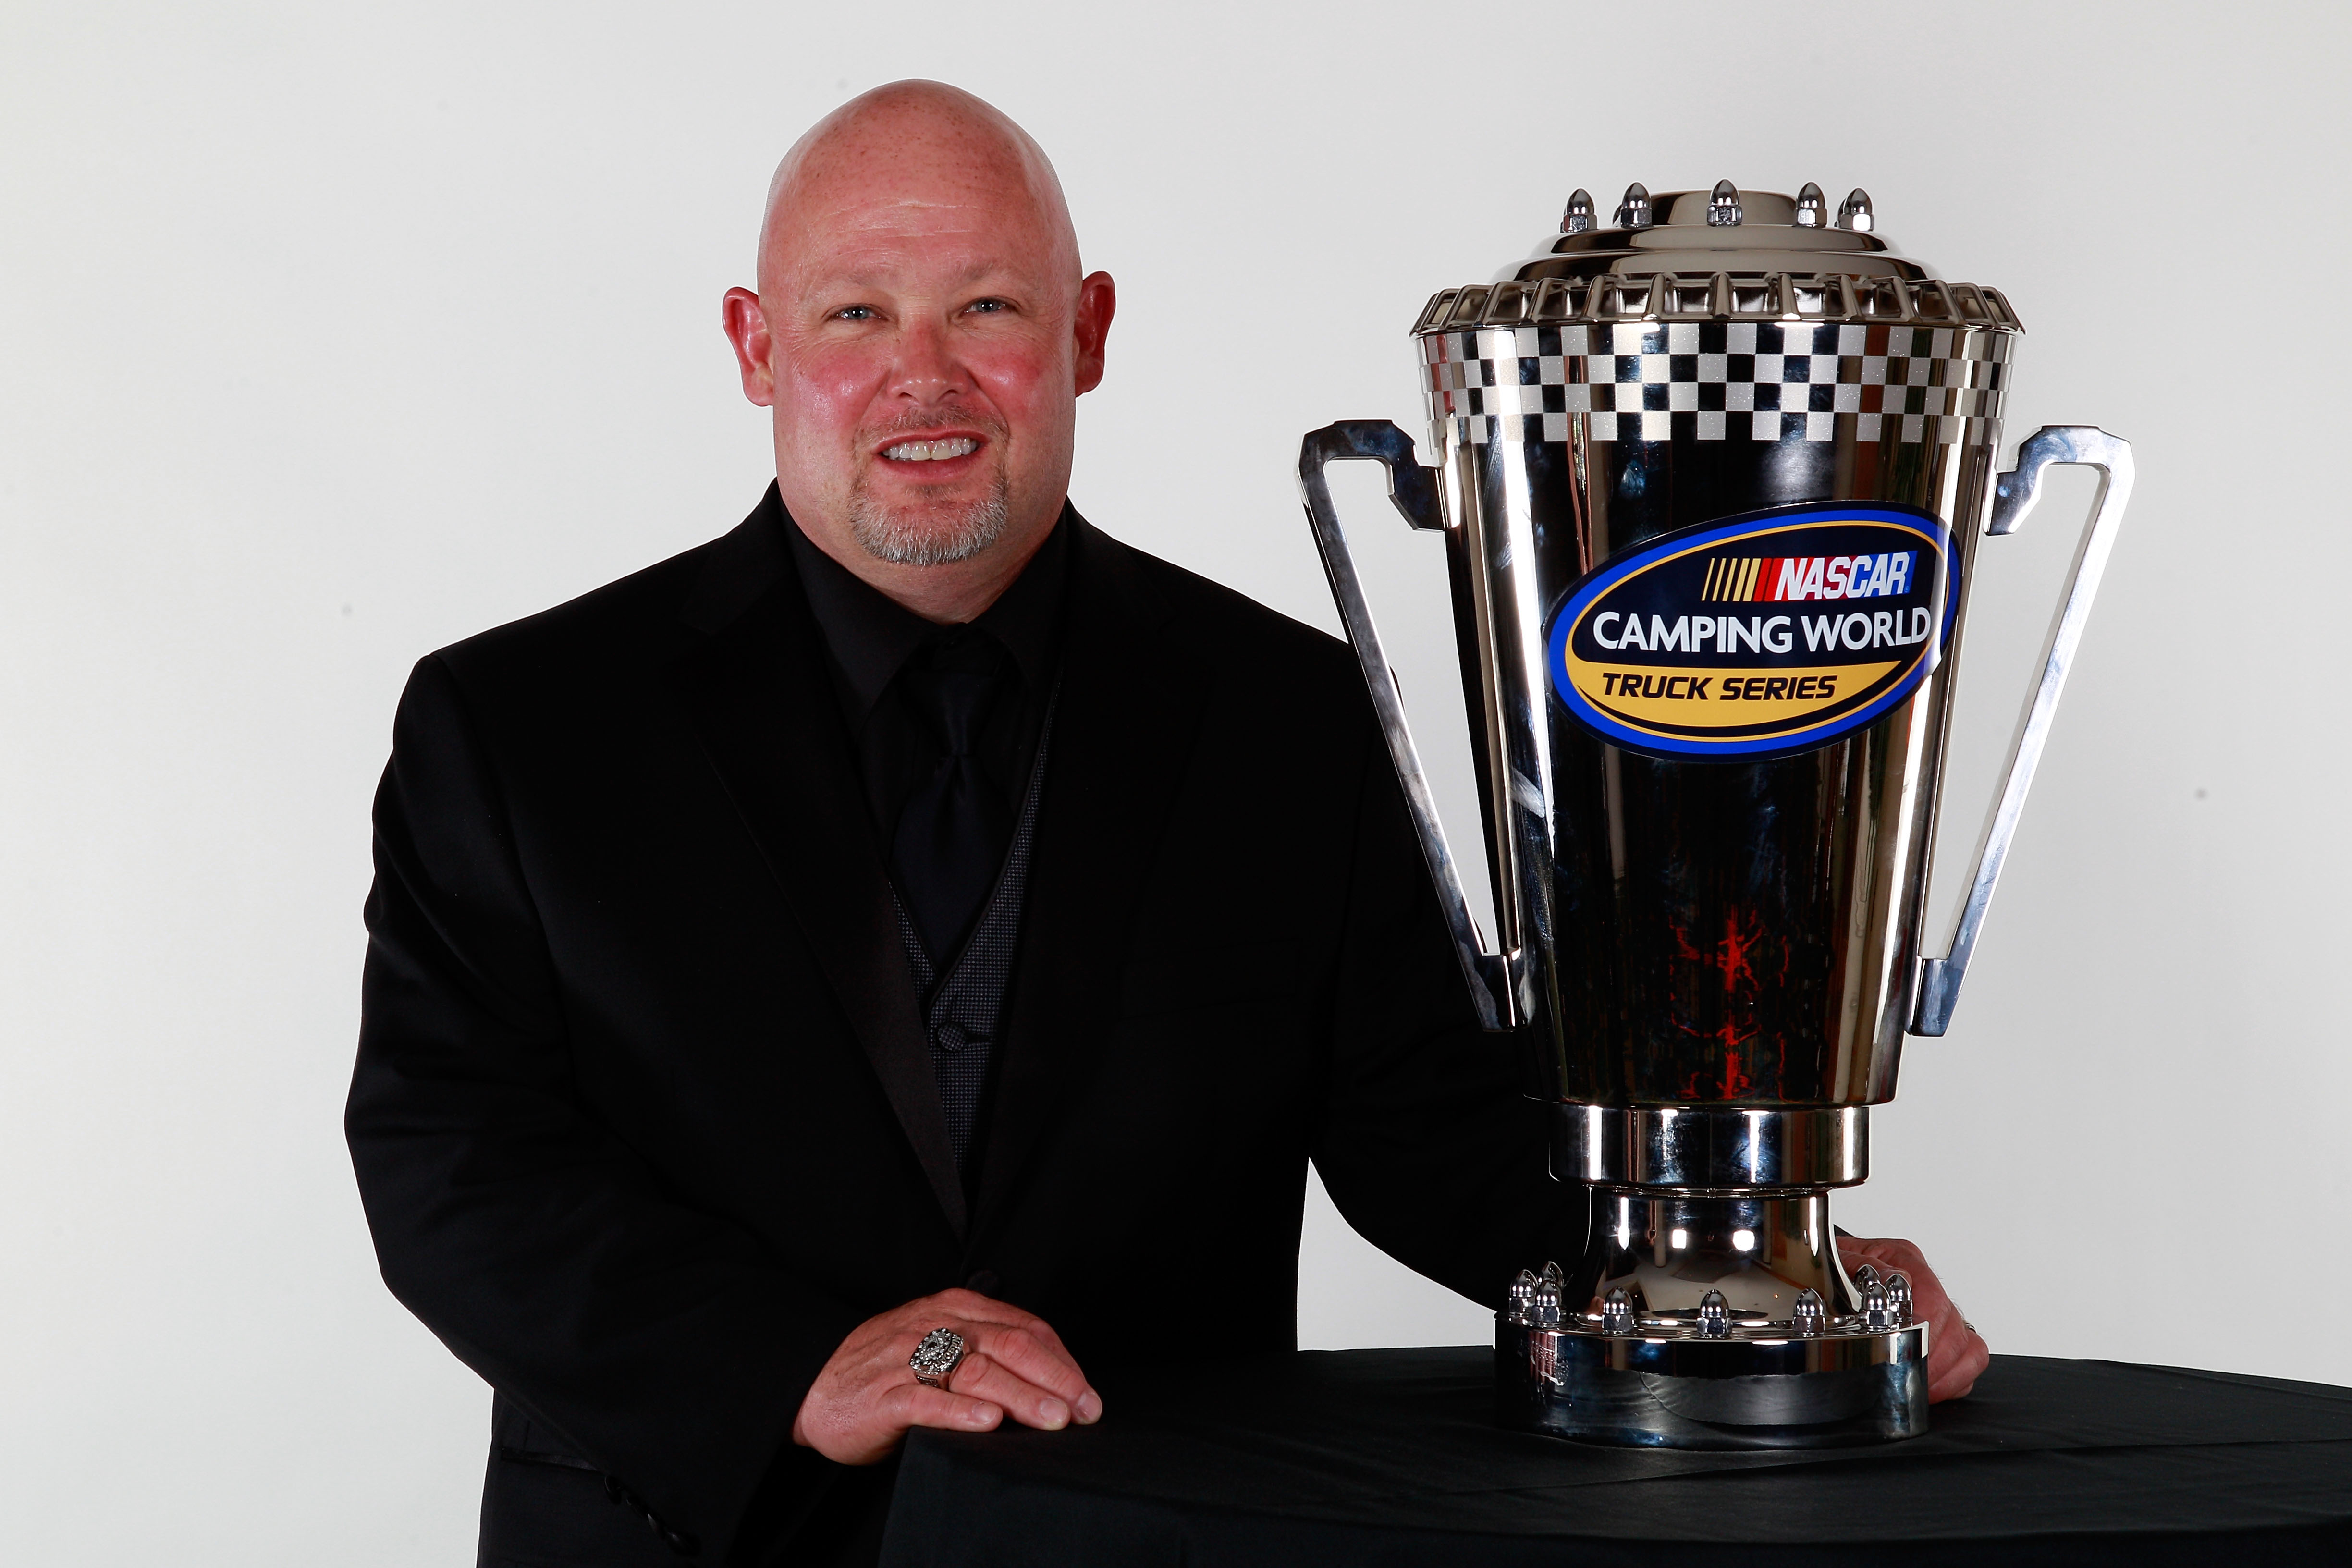 MIAMI - NOVEMBER 22:  2010 Camping World Truck Series Champion Todd Bodine, driver of the #30 Germain Racing Toyota, poses after receiving the Camping World Truck Series Champions trophy during the NASCAR Nationwide/Camping World Truck Series Banquet at L